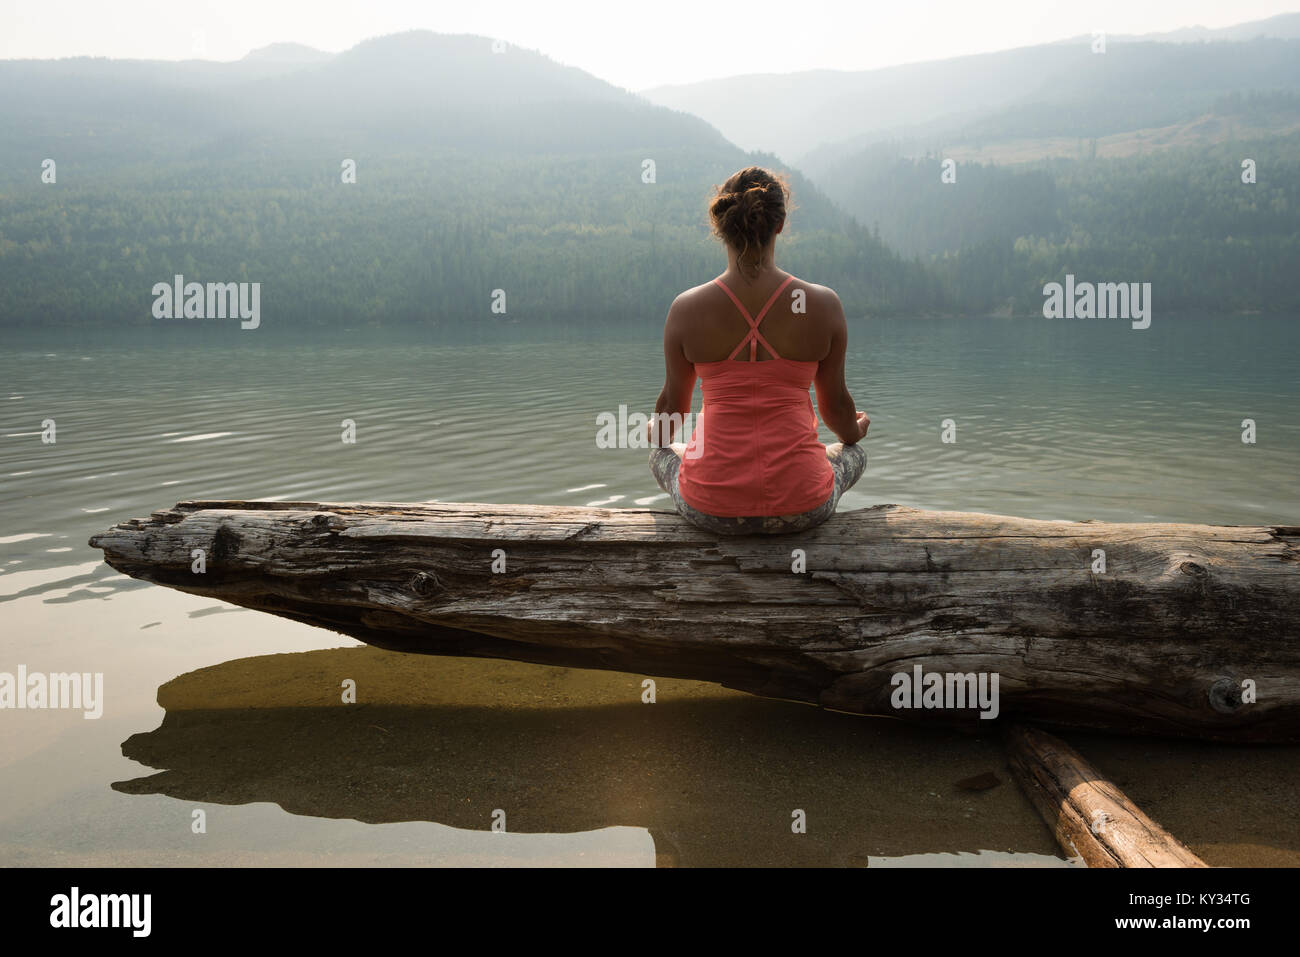 Fit woman sitting in meditating posture on a fallen tree trunk Stock Photo